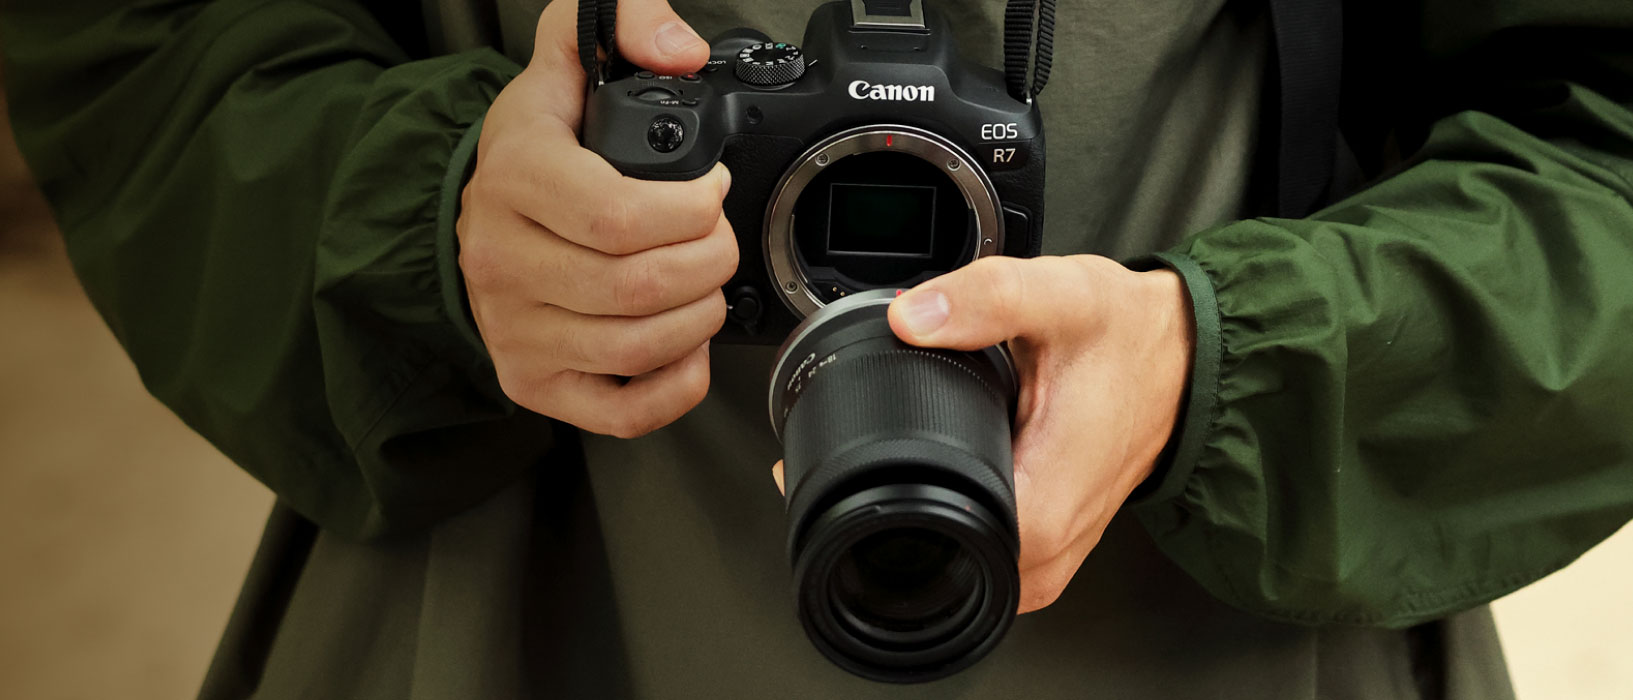 Canon EOS R7 review: An APS-C mirrorless camera built for speed